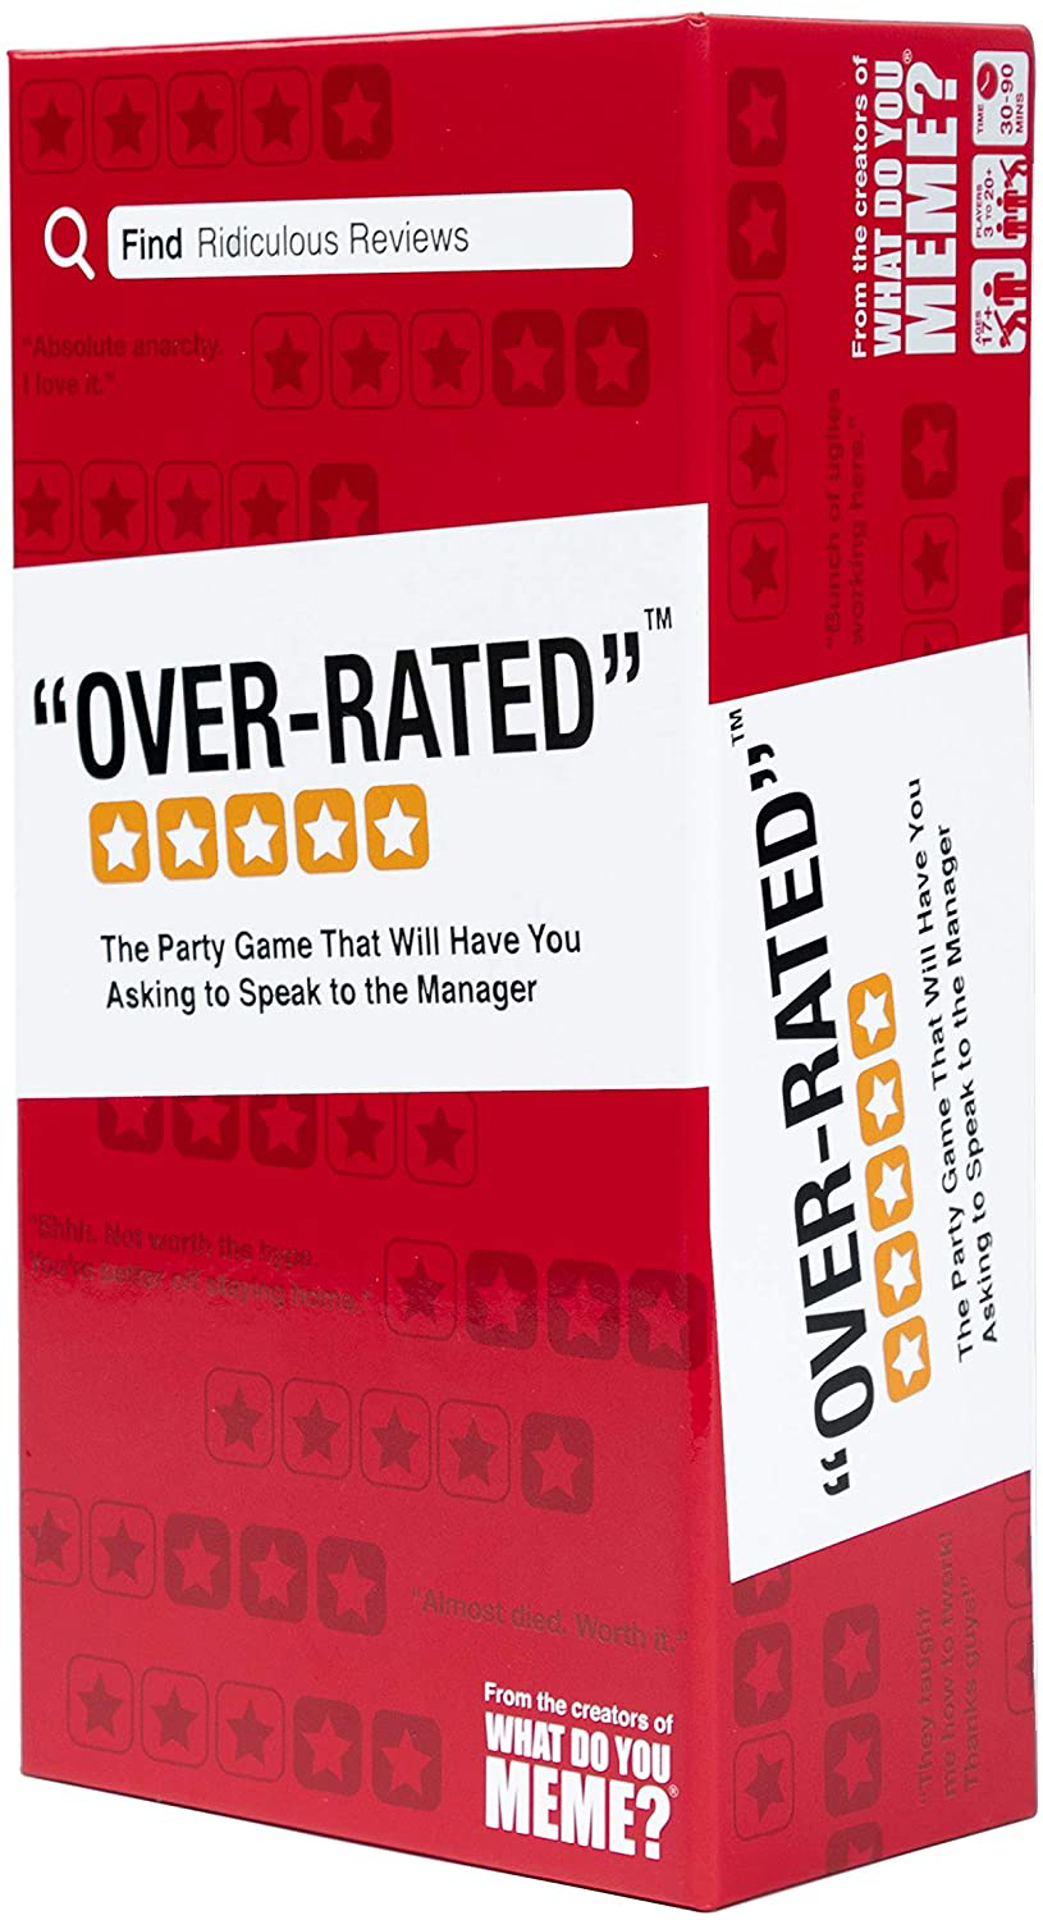 Over-Rated - The Adult Party Game Where You Compete to Review Absurd Locations